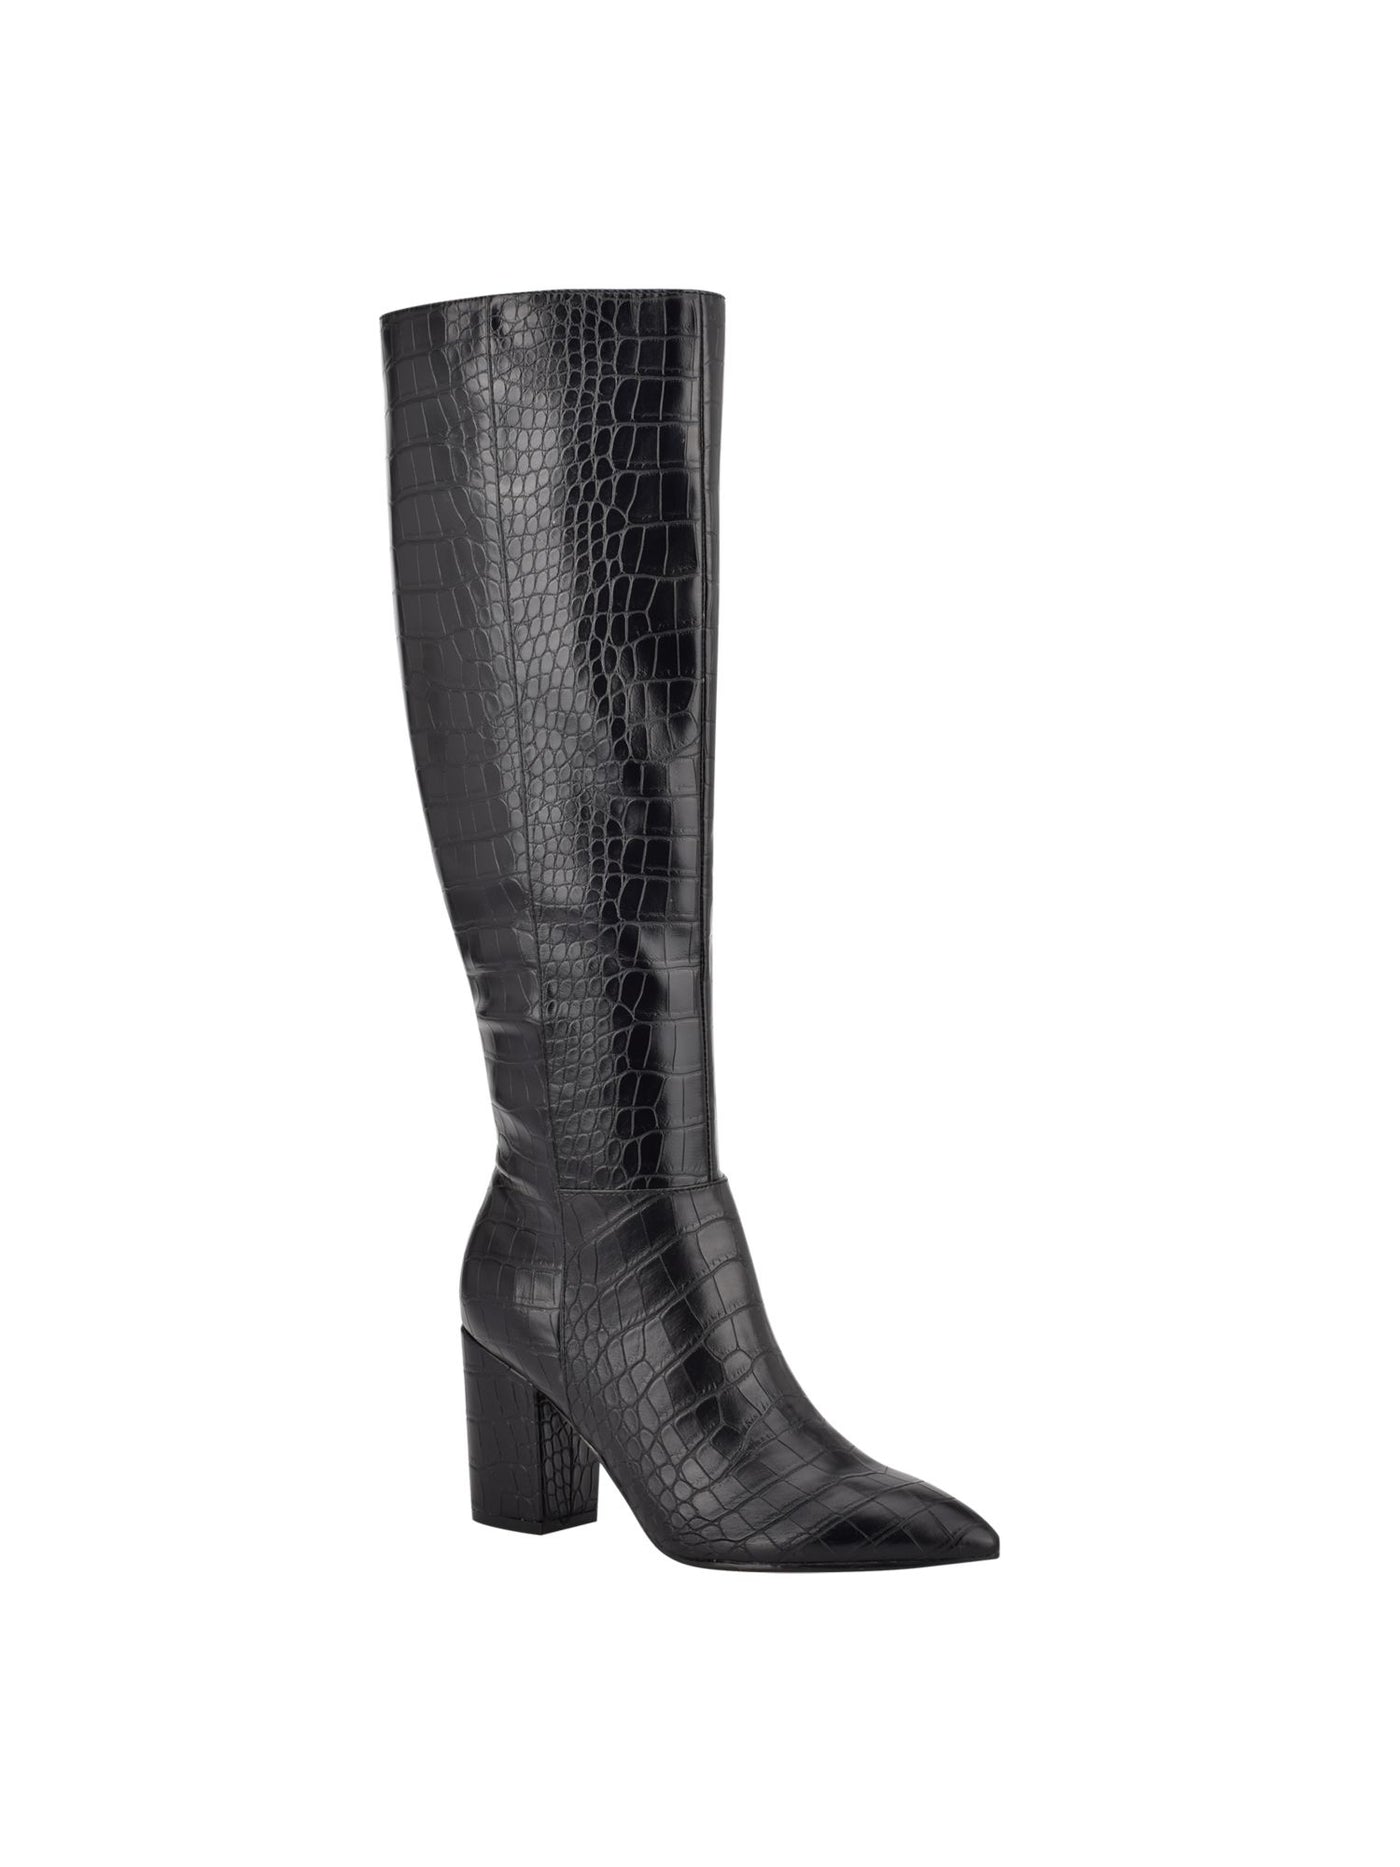 MARC FISHER Womens Black Croco Texture Erli Pointed Toe Stiletto Zip-Up Boots Shoes 5.5